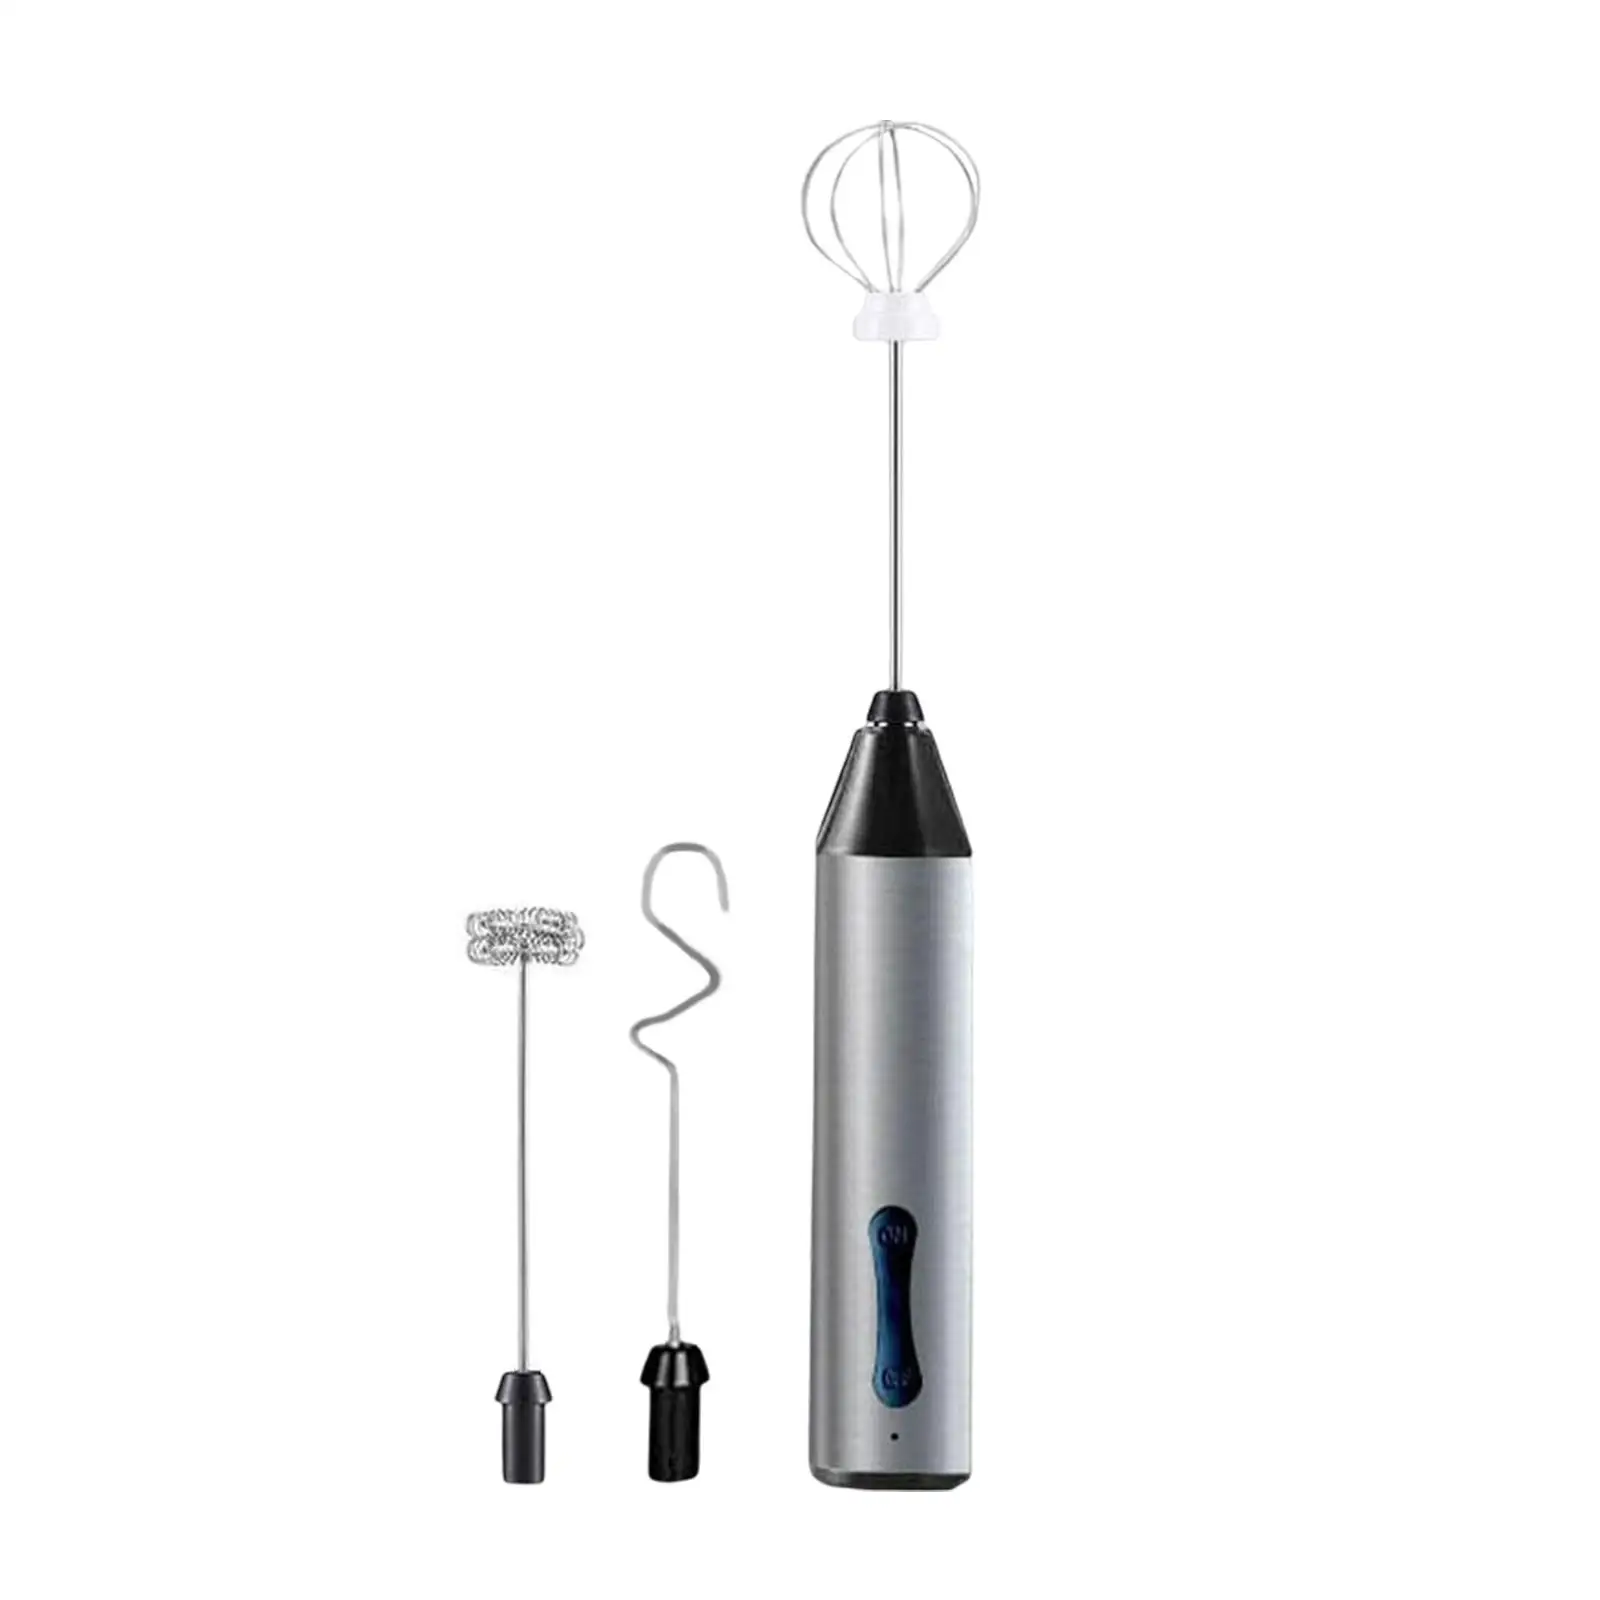 Milk Frother Egg Beater USB C Charging Whisk Drink with 3 Stainless Whisks Mixer Blender for Cappuccino